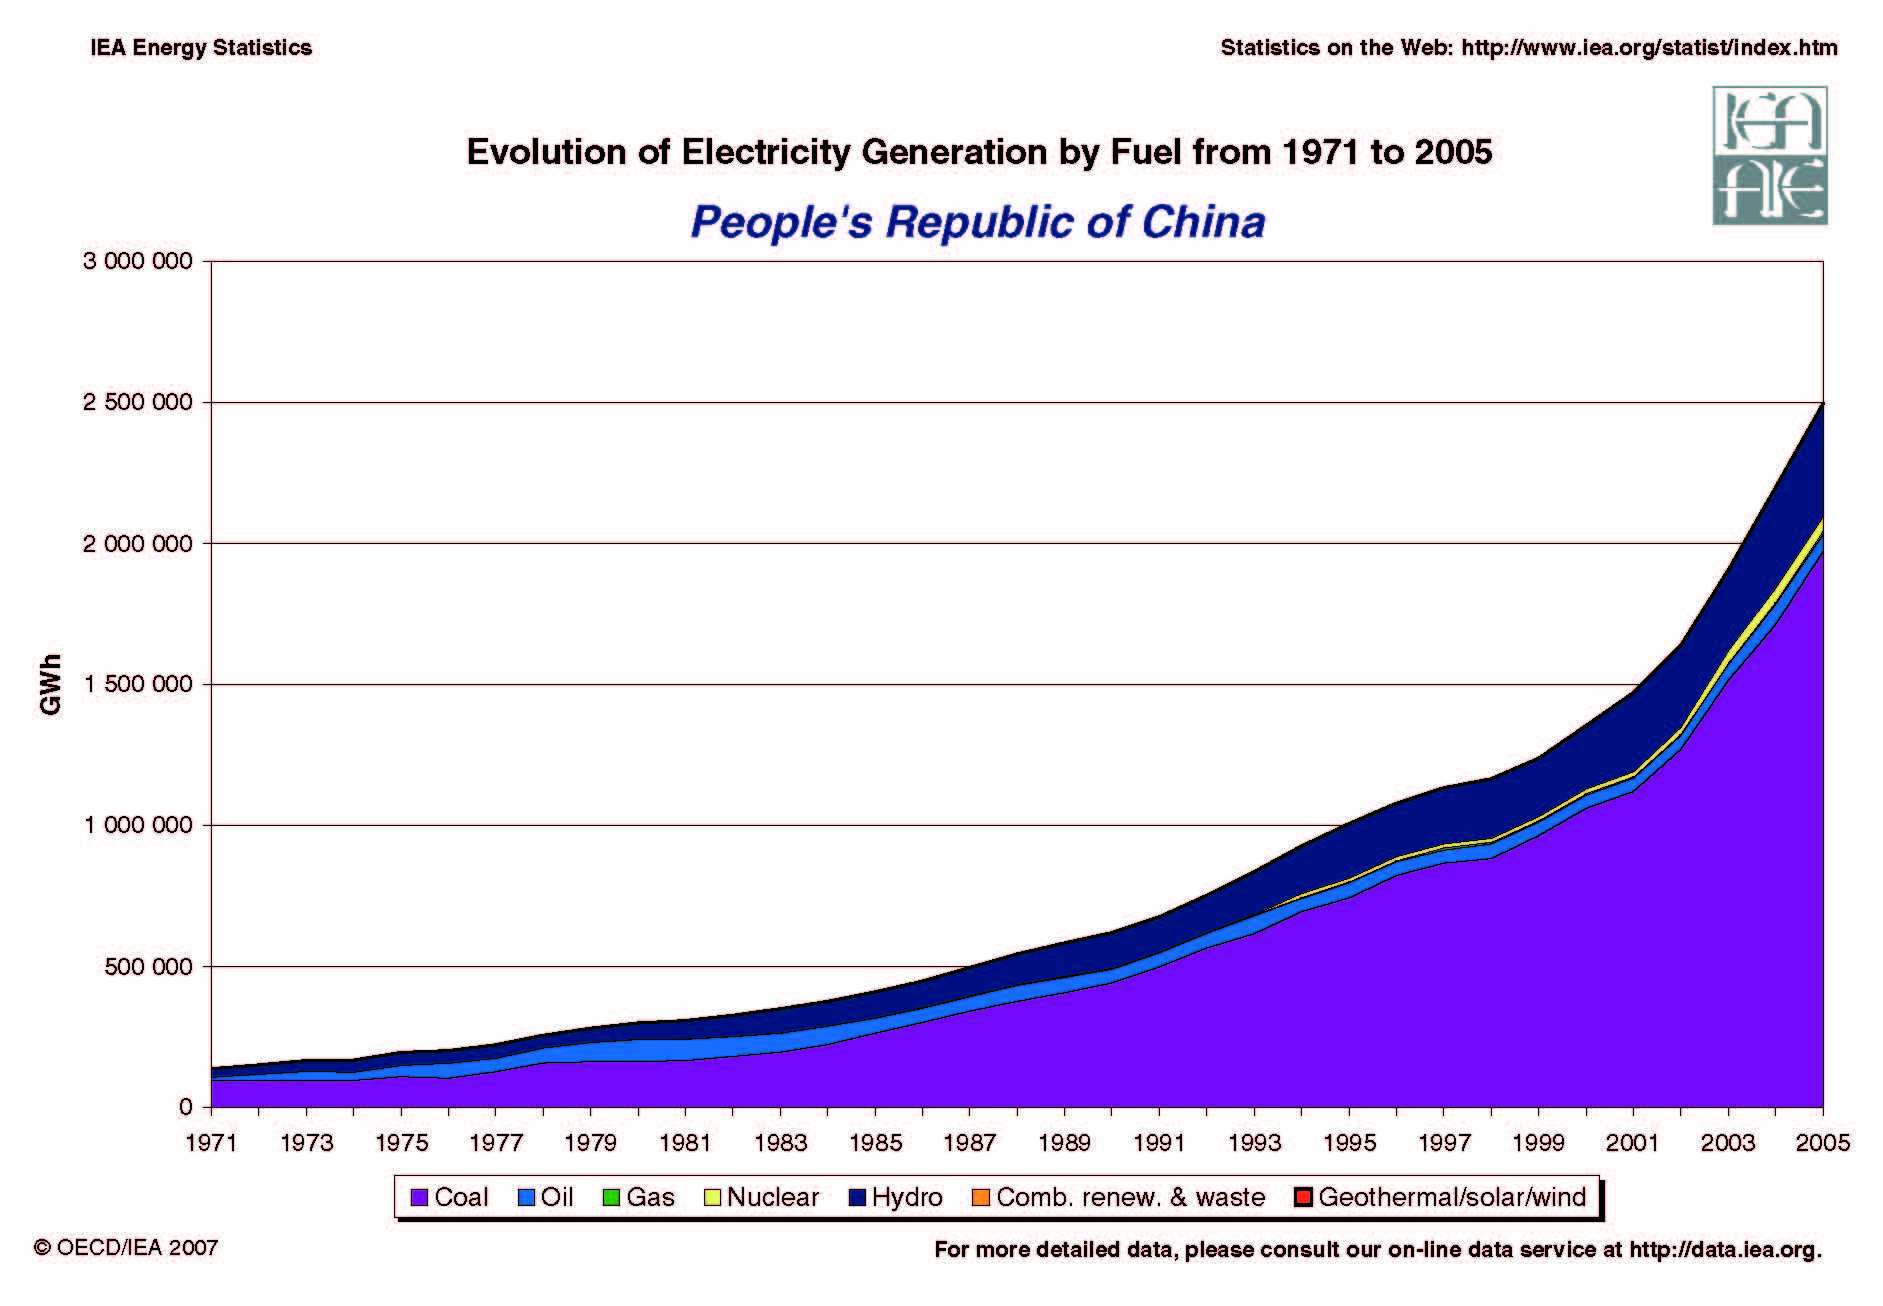 Electricity generation by fuel - China